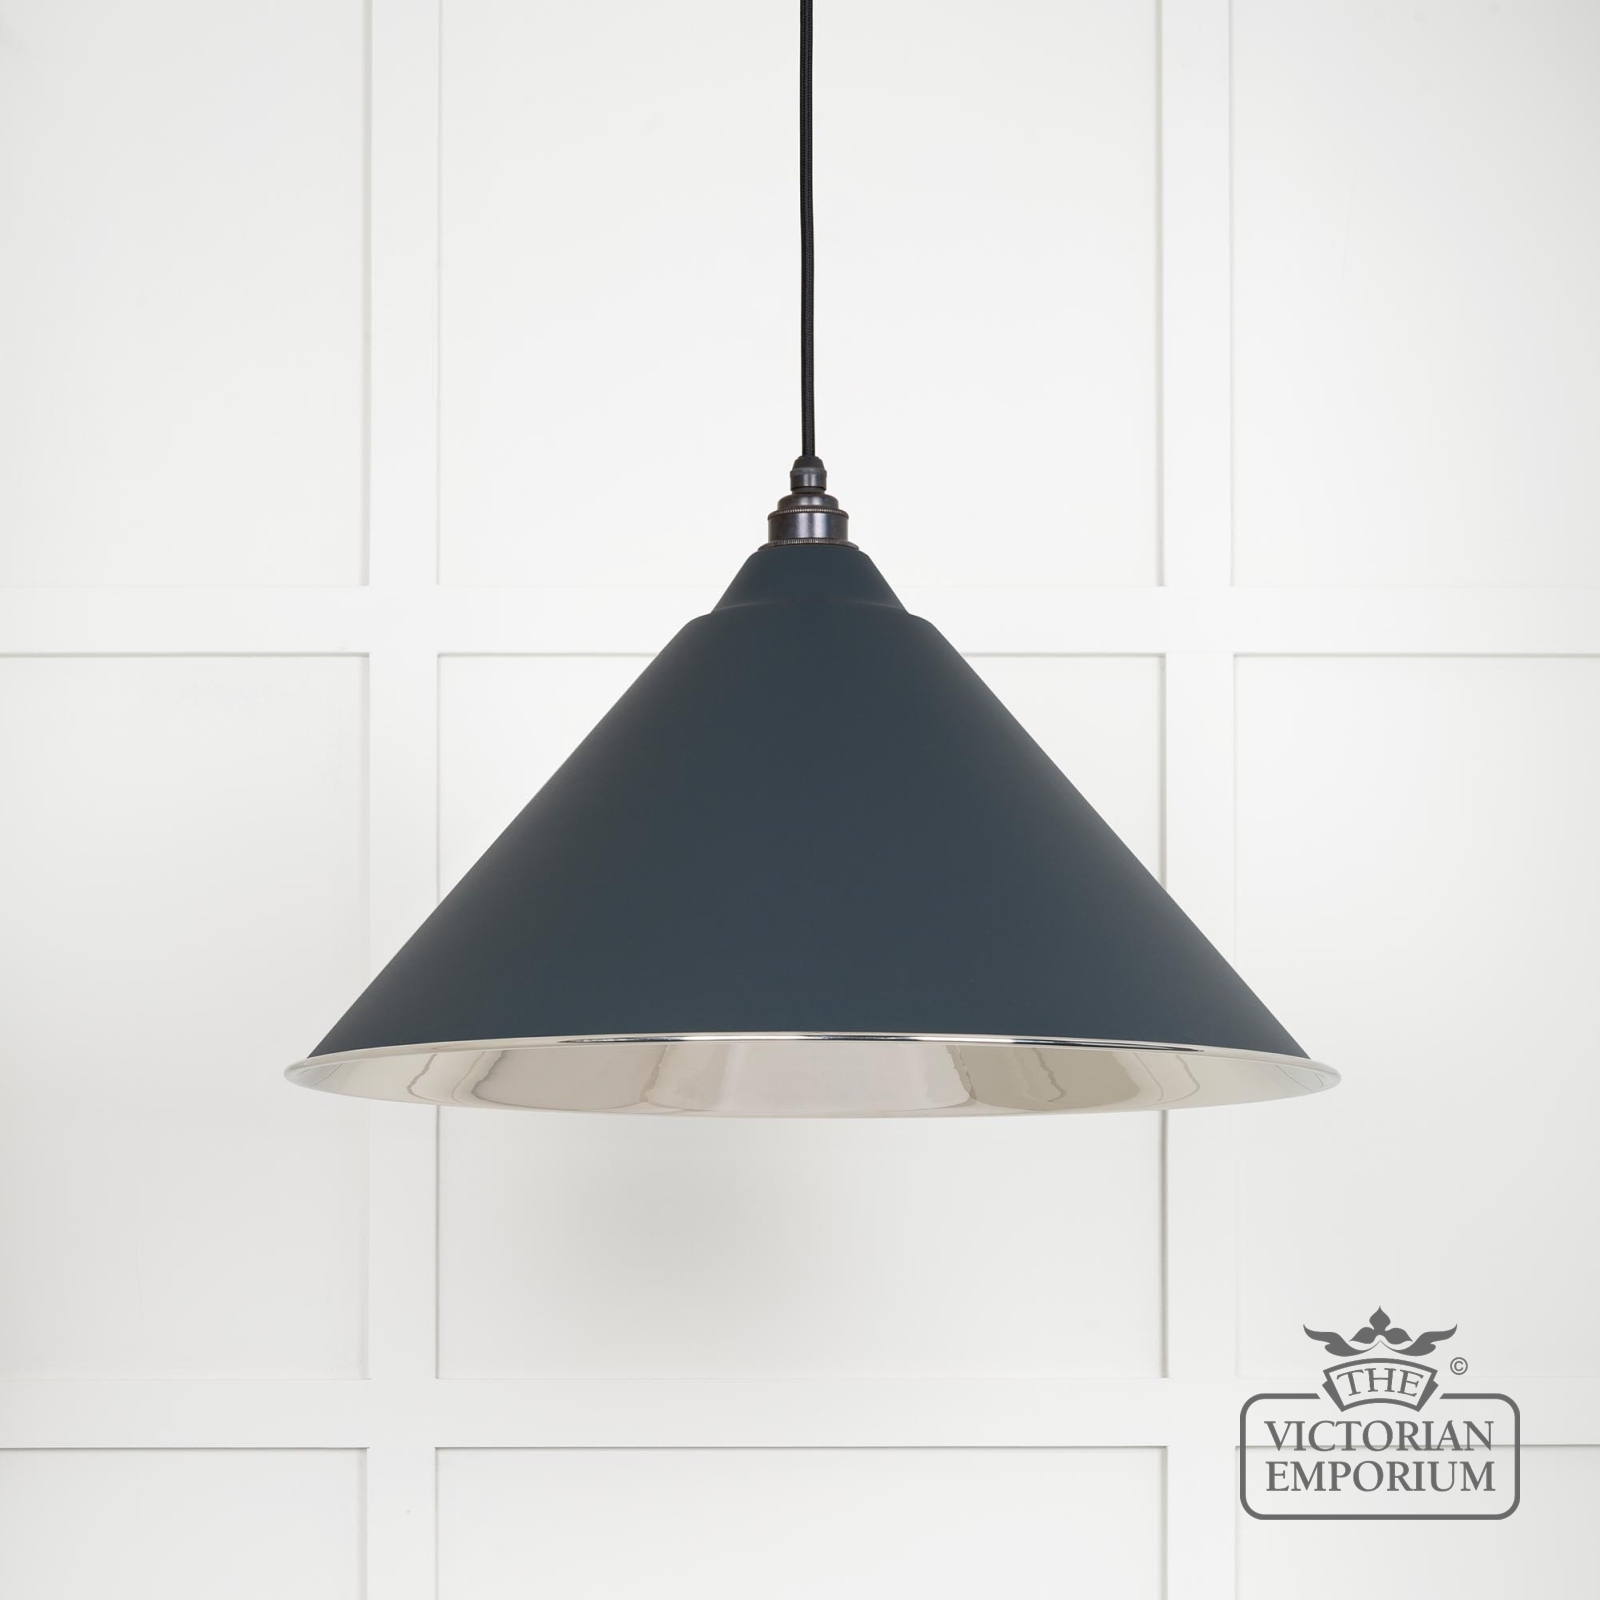 Hockliffe Pendant Light in Smooth Nickel and Soot Exterior